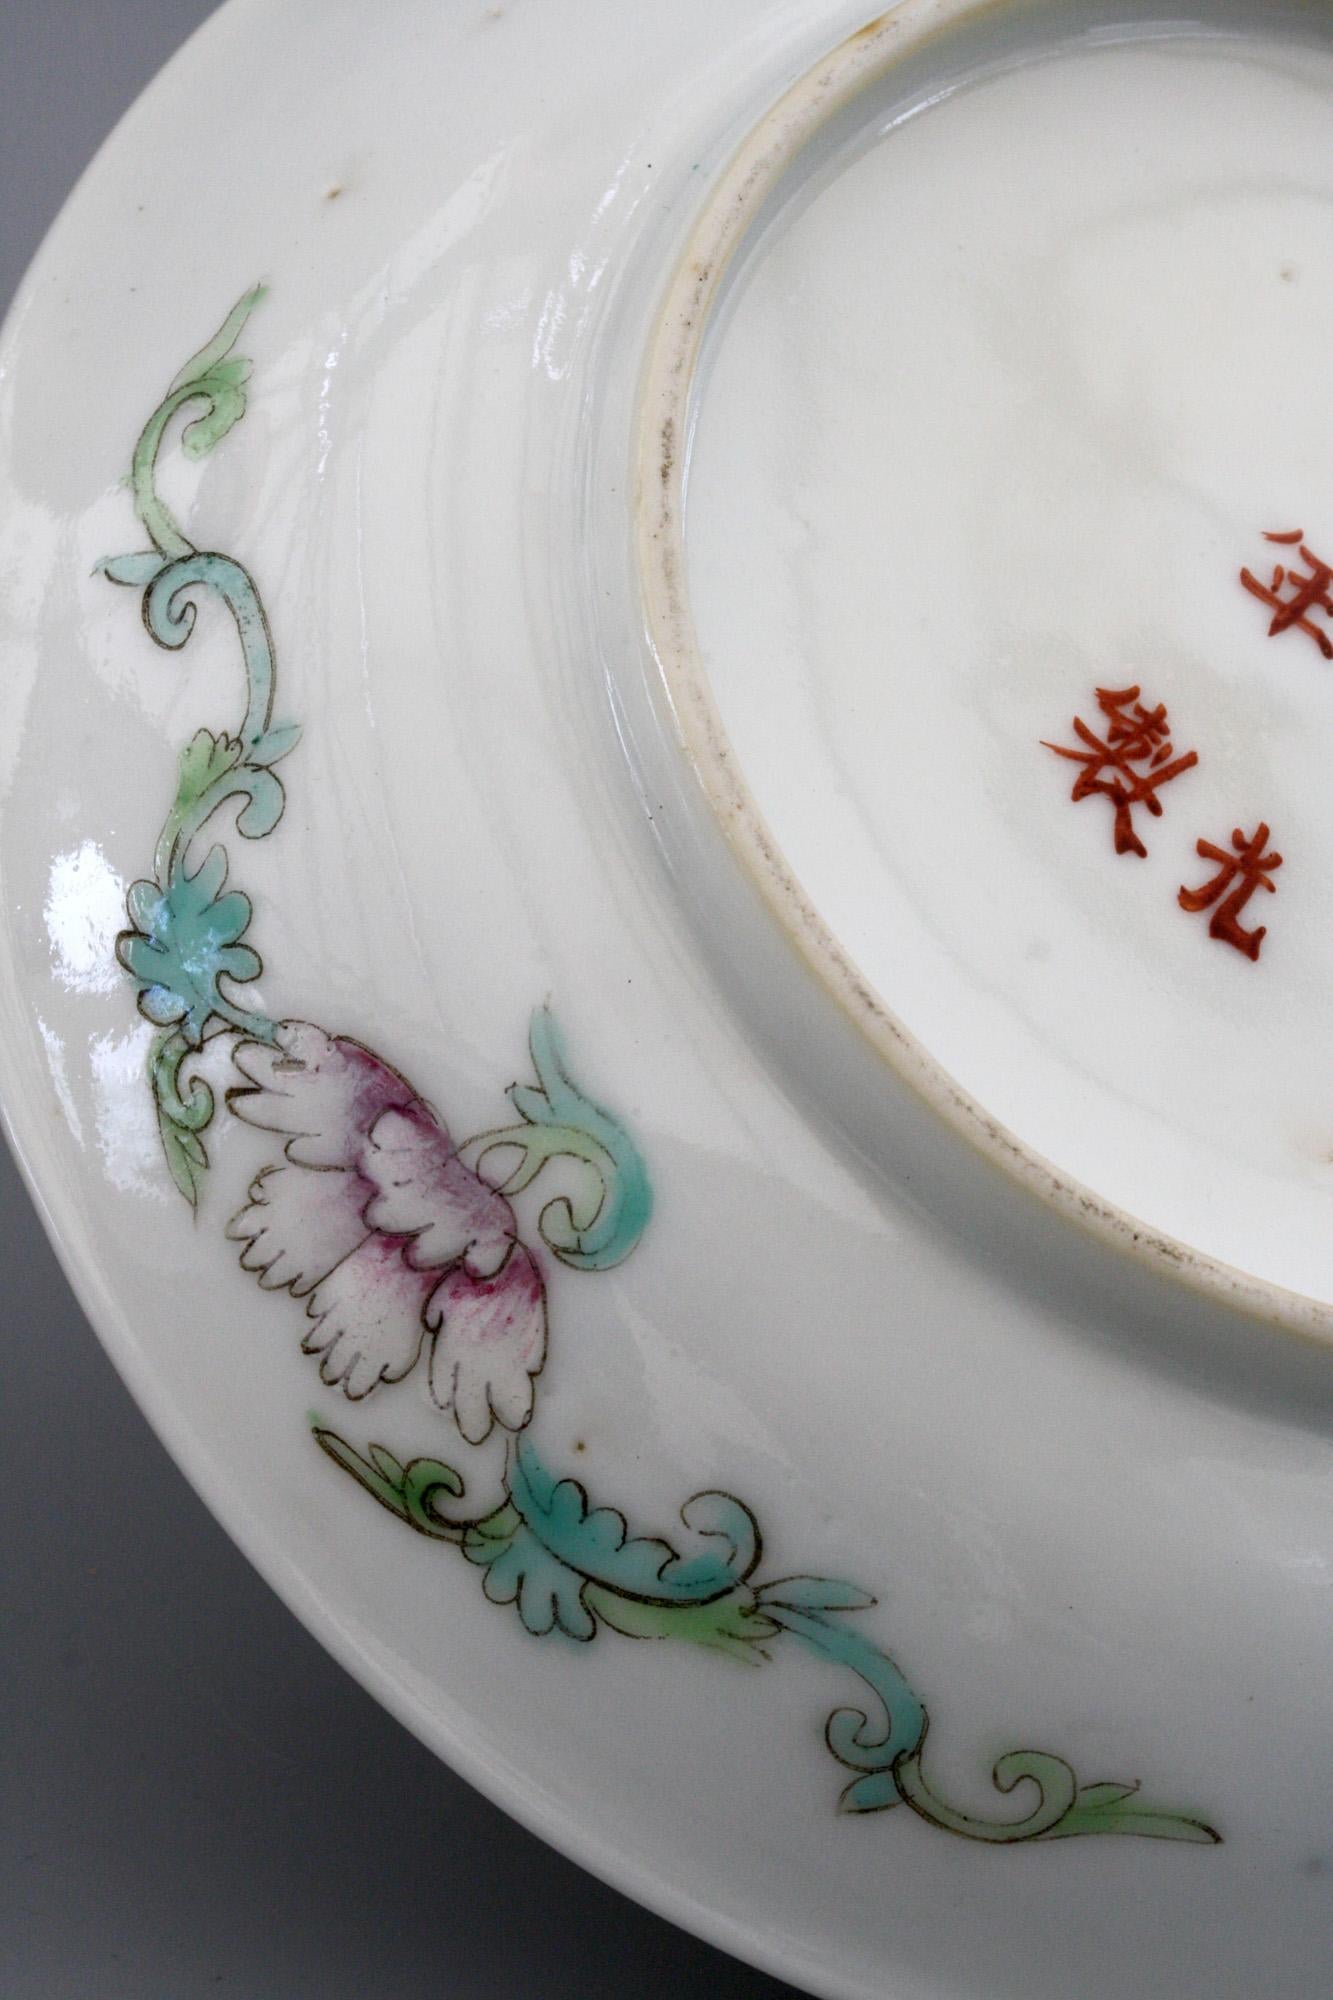 An exceptional Chinese Guangxu mark and period porcelain dish hand painted with a millefleur design dating between 1875 and 1908. The small rounded dish has a raised rim and is exquisitely painted in subtle colors with a multitude of floral blooms